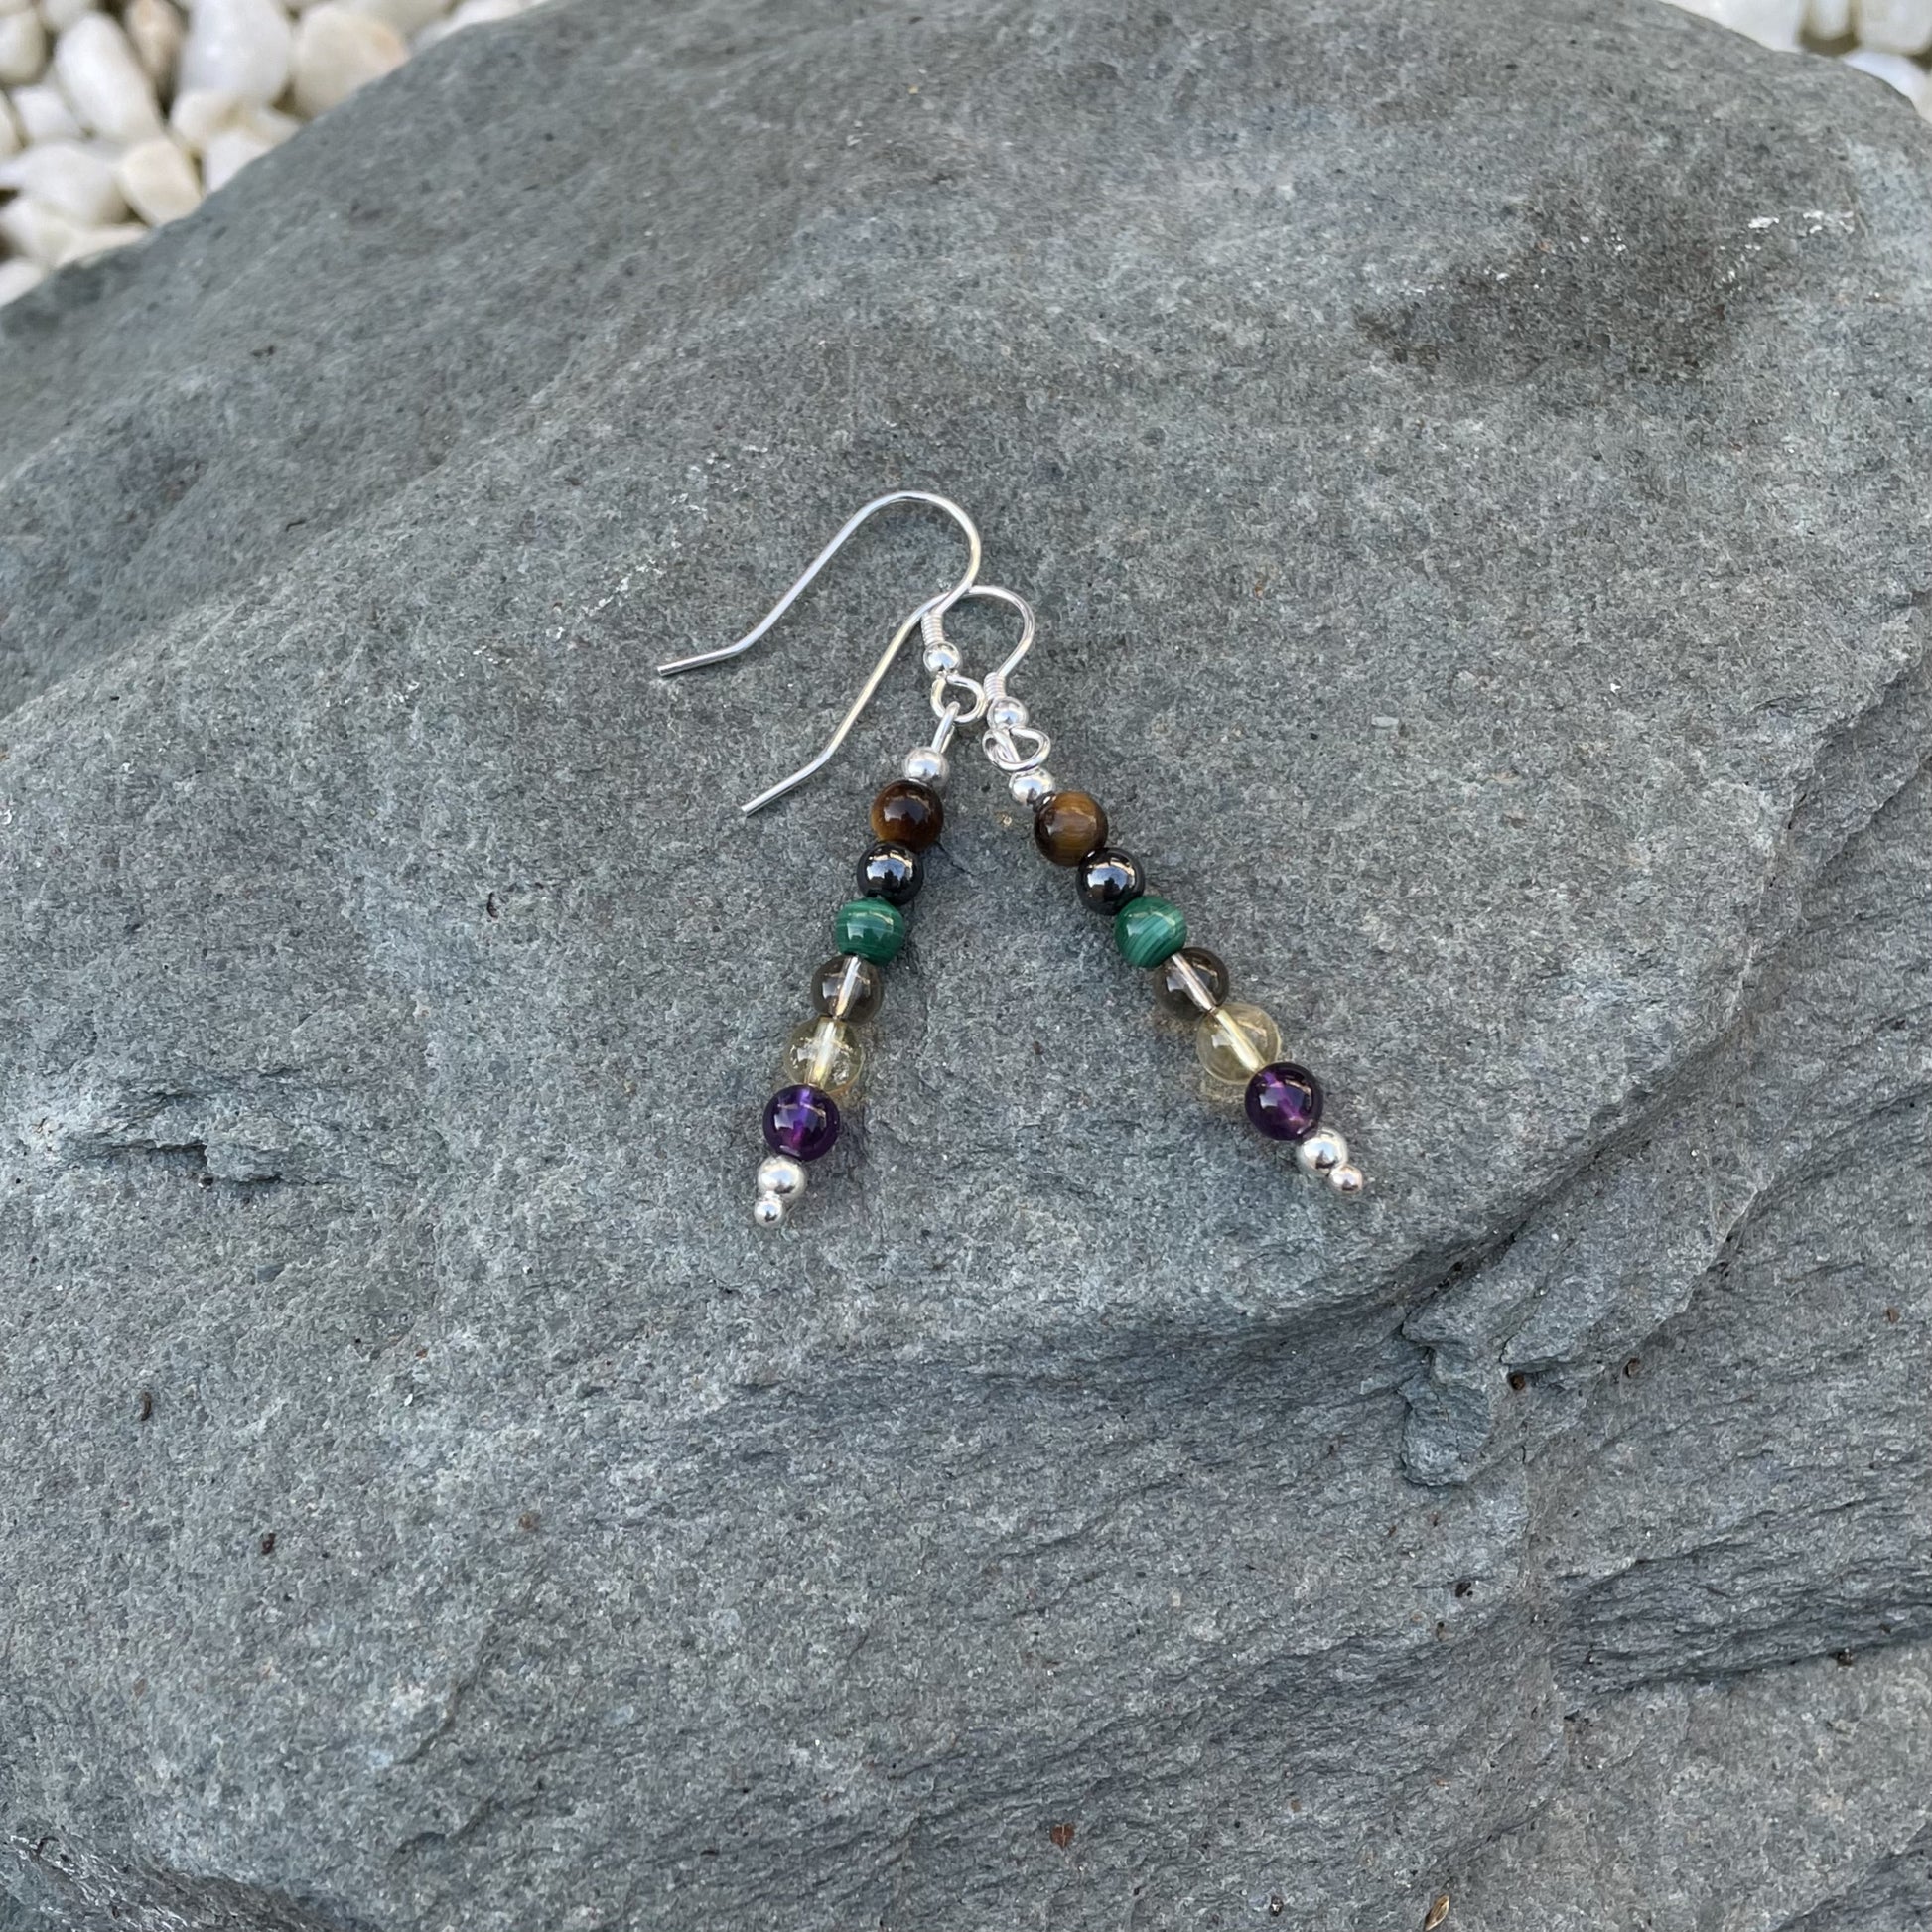 Addiction recovery beaded earrings on stone